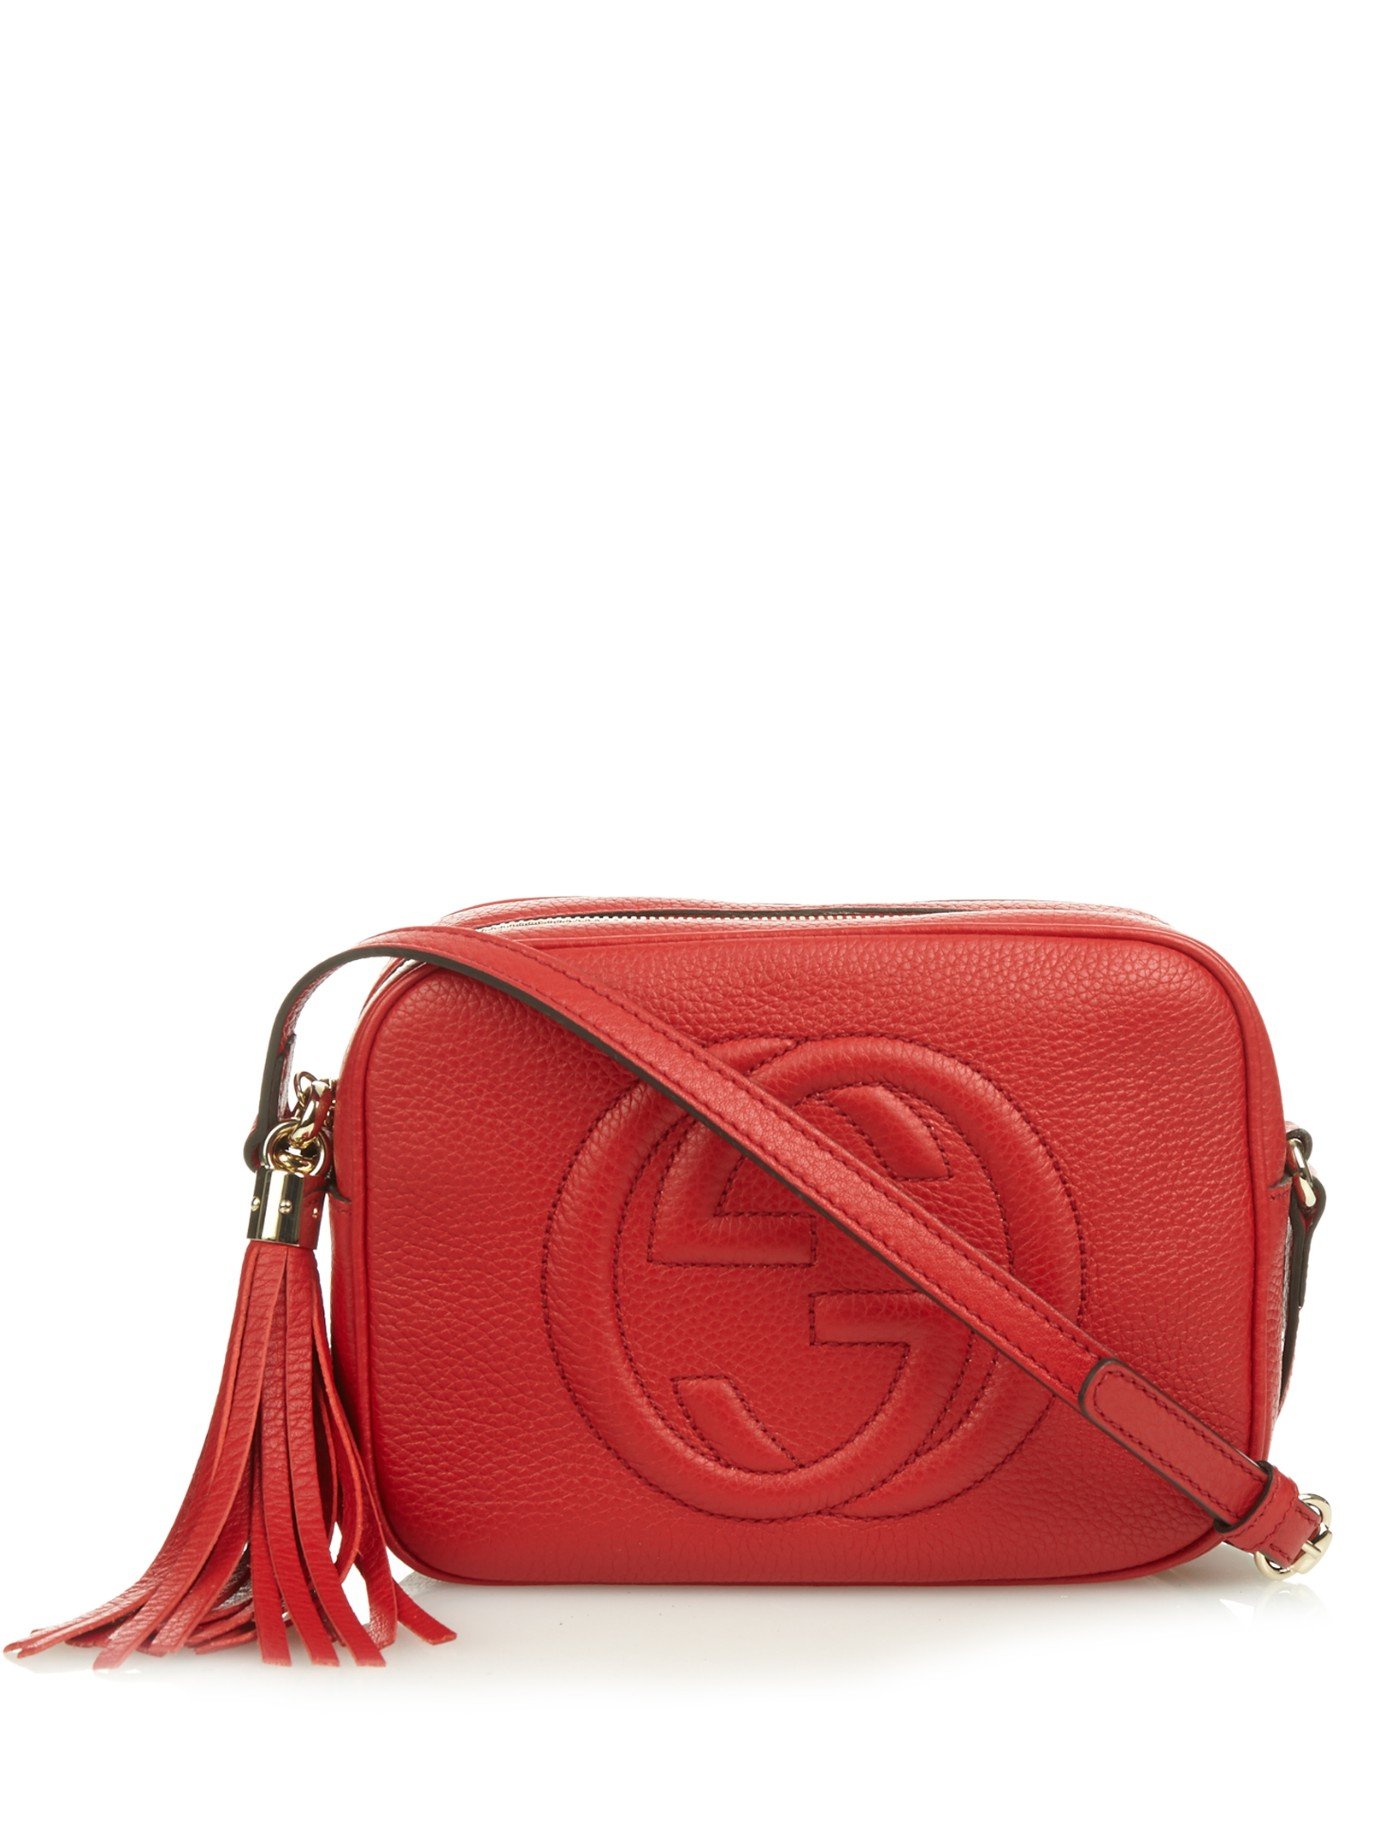 Gucci Soho Grained-Leather Cross-Body Bag in Red - Lyst